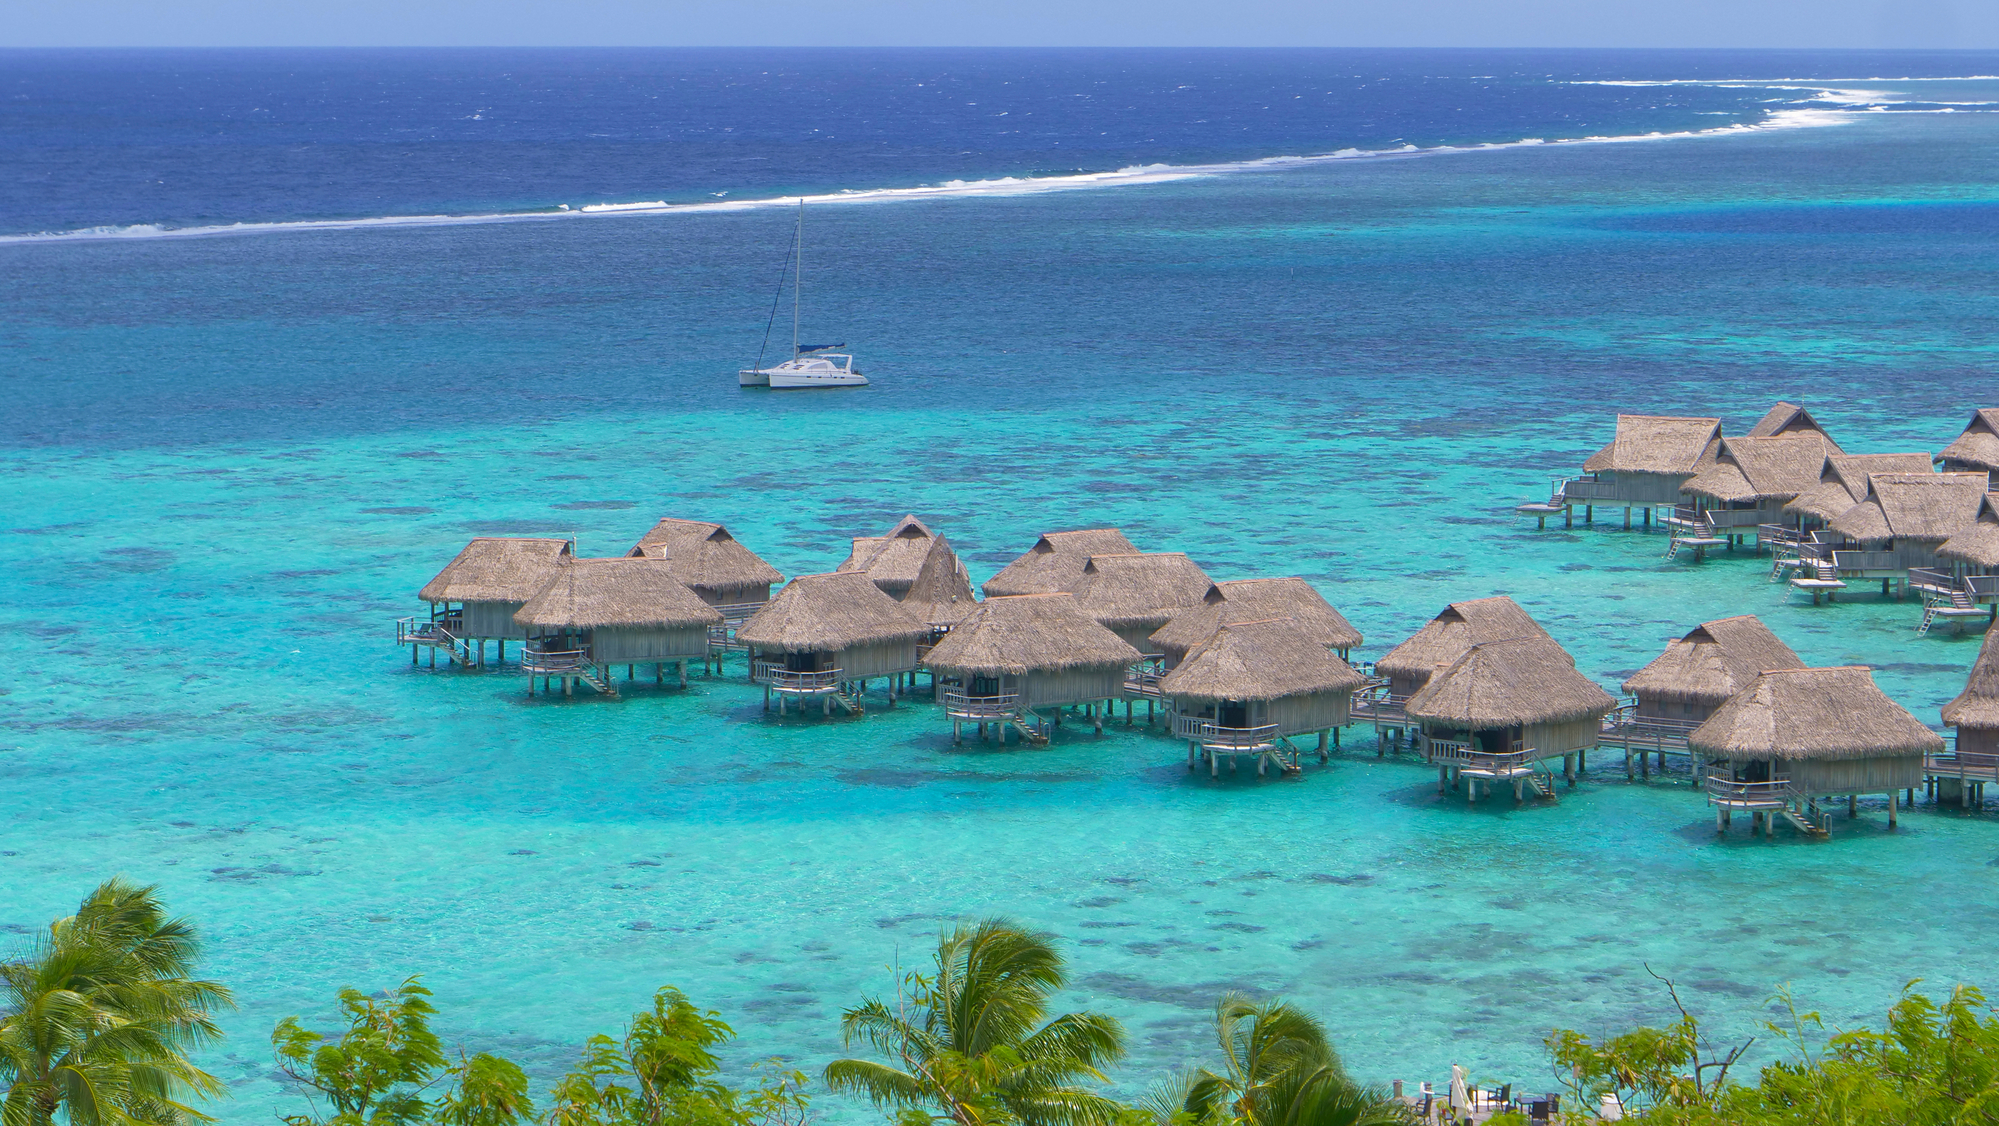 https://www.gowalkabouttravel.com/wp-content/uploads/2021/12/Best-Overwater-Bungalows-in-the-South-Pacific-Islands.jpg